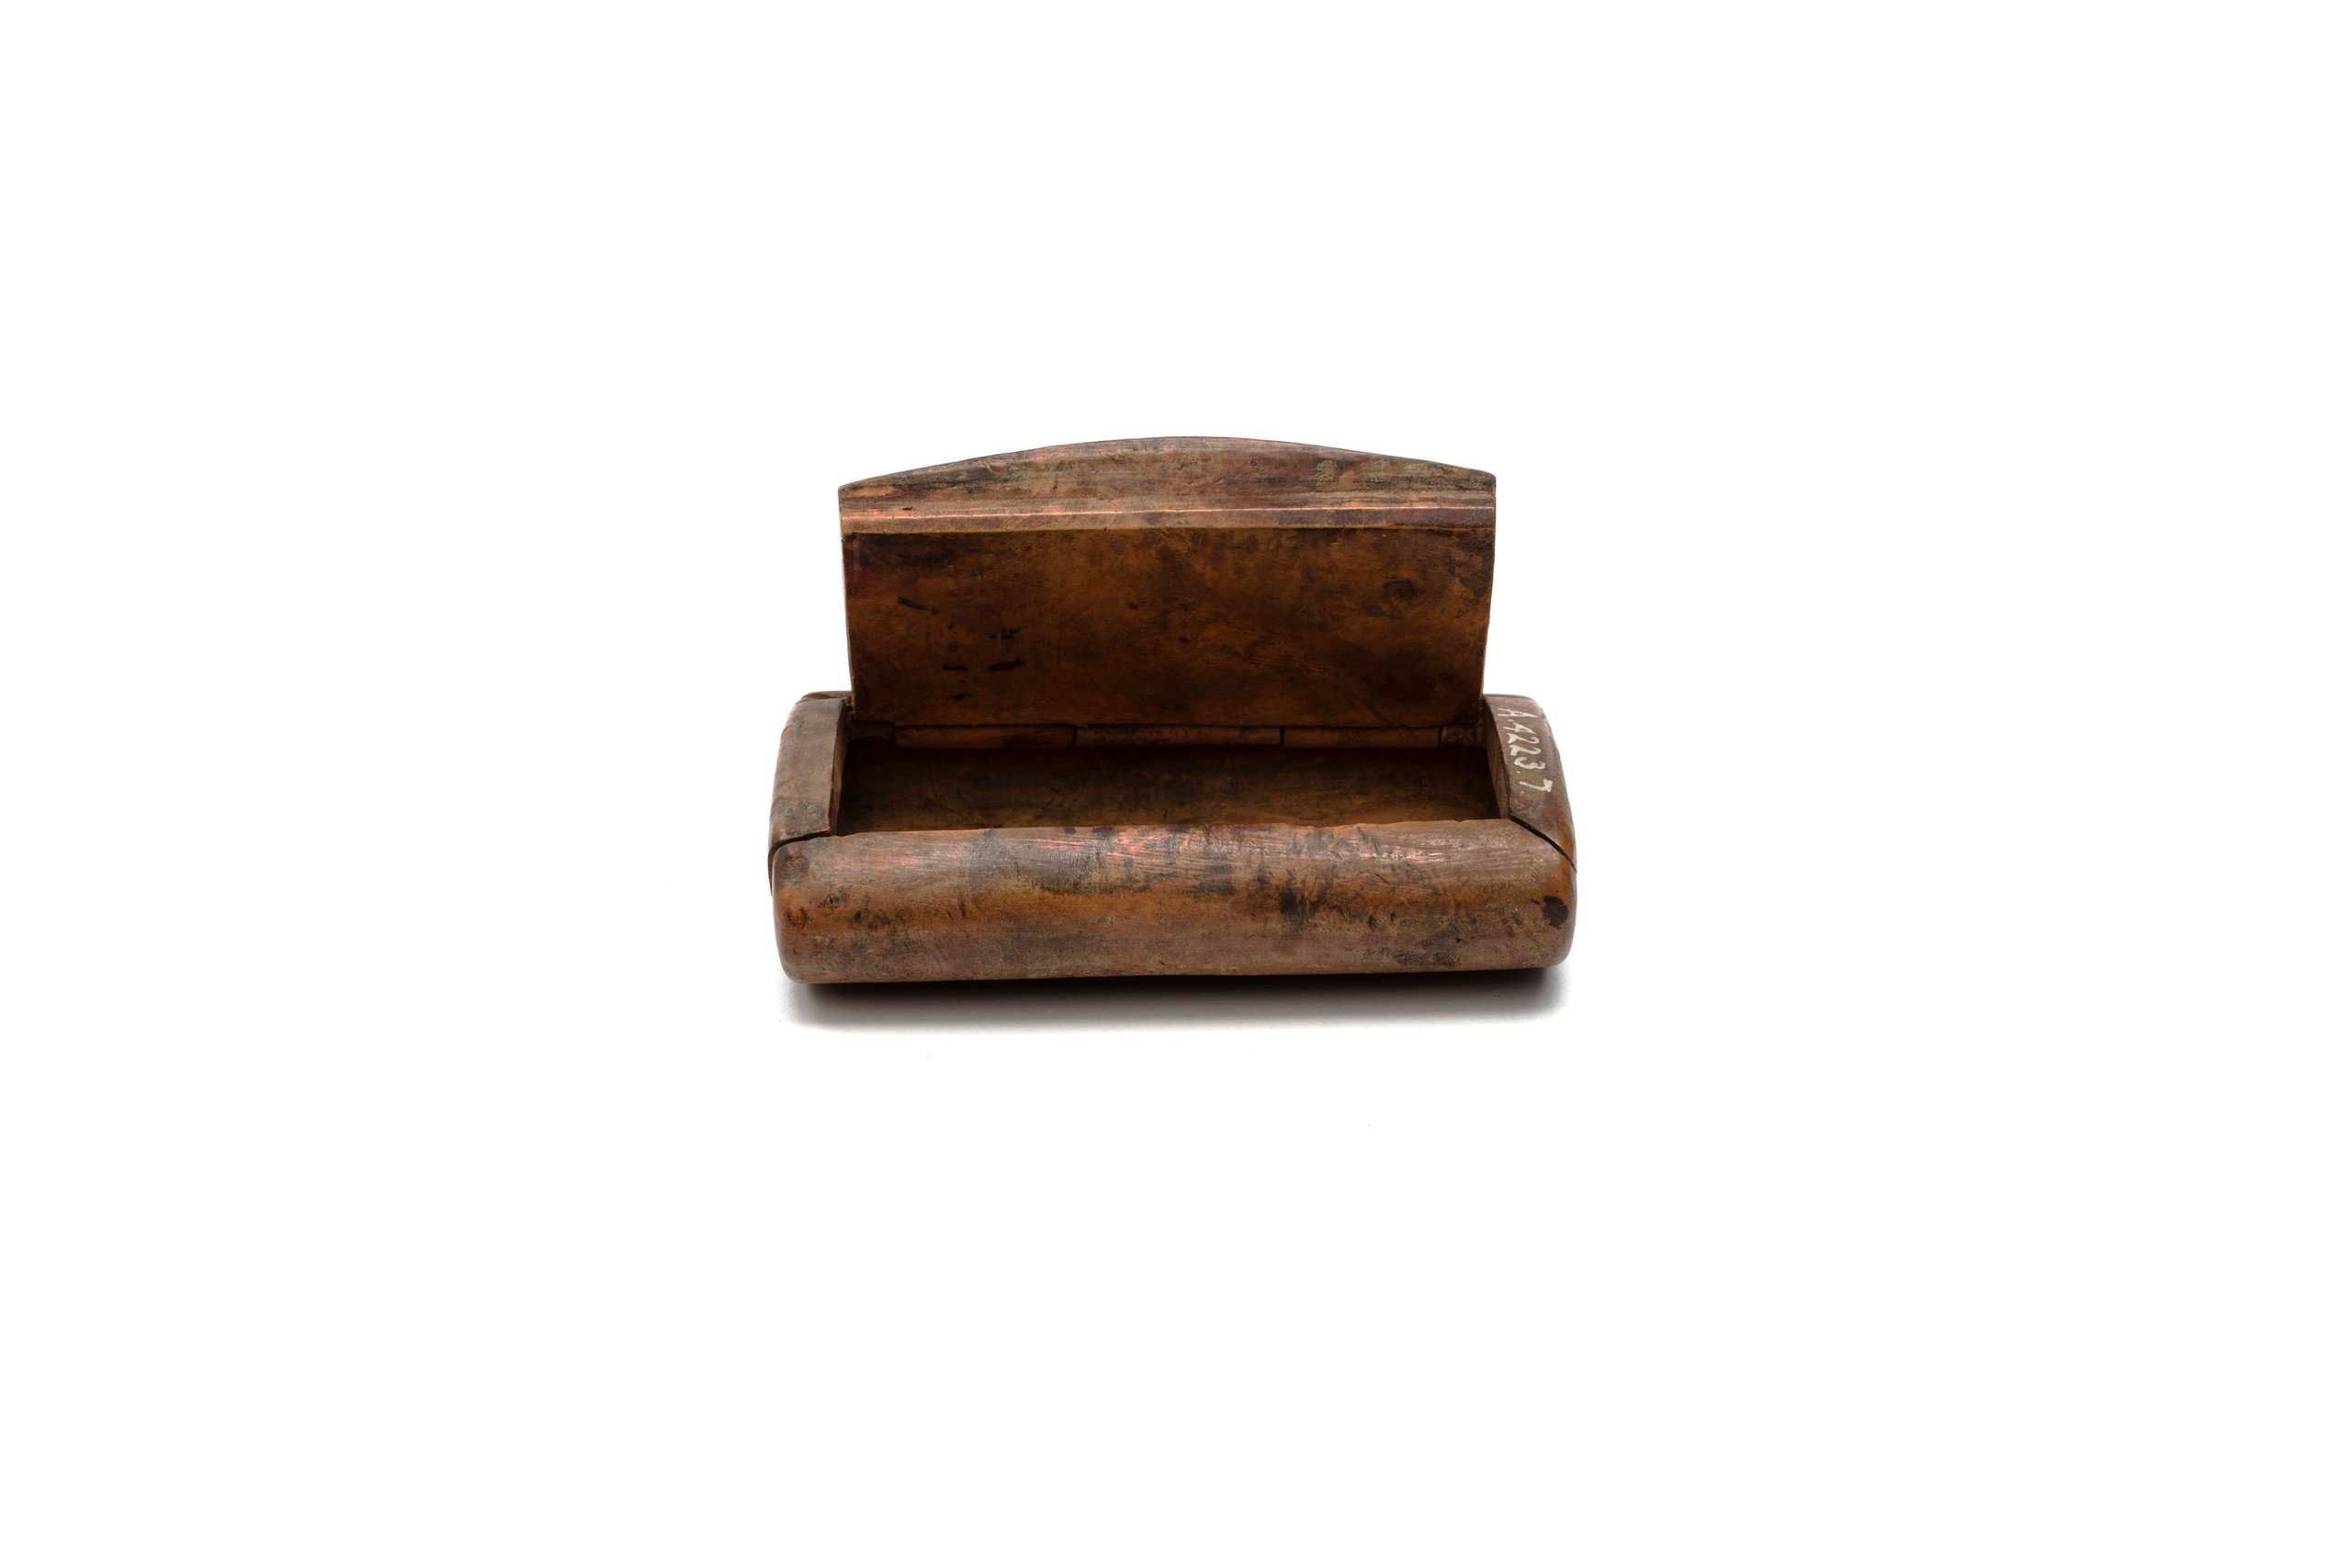 Small wooden box with hinged lid